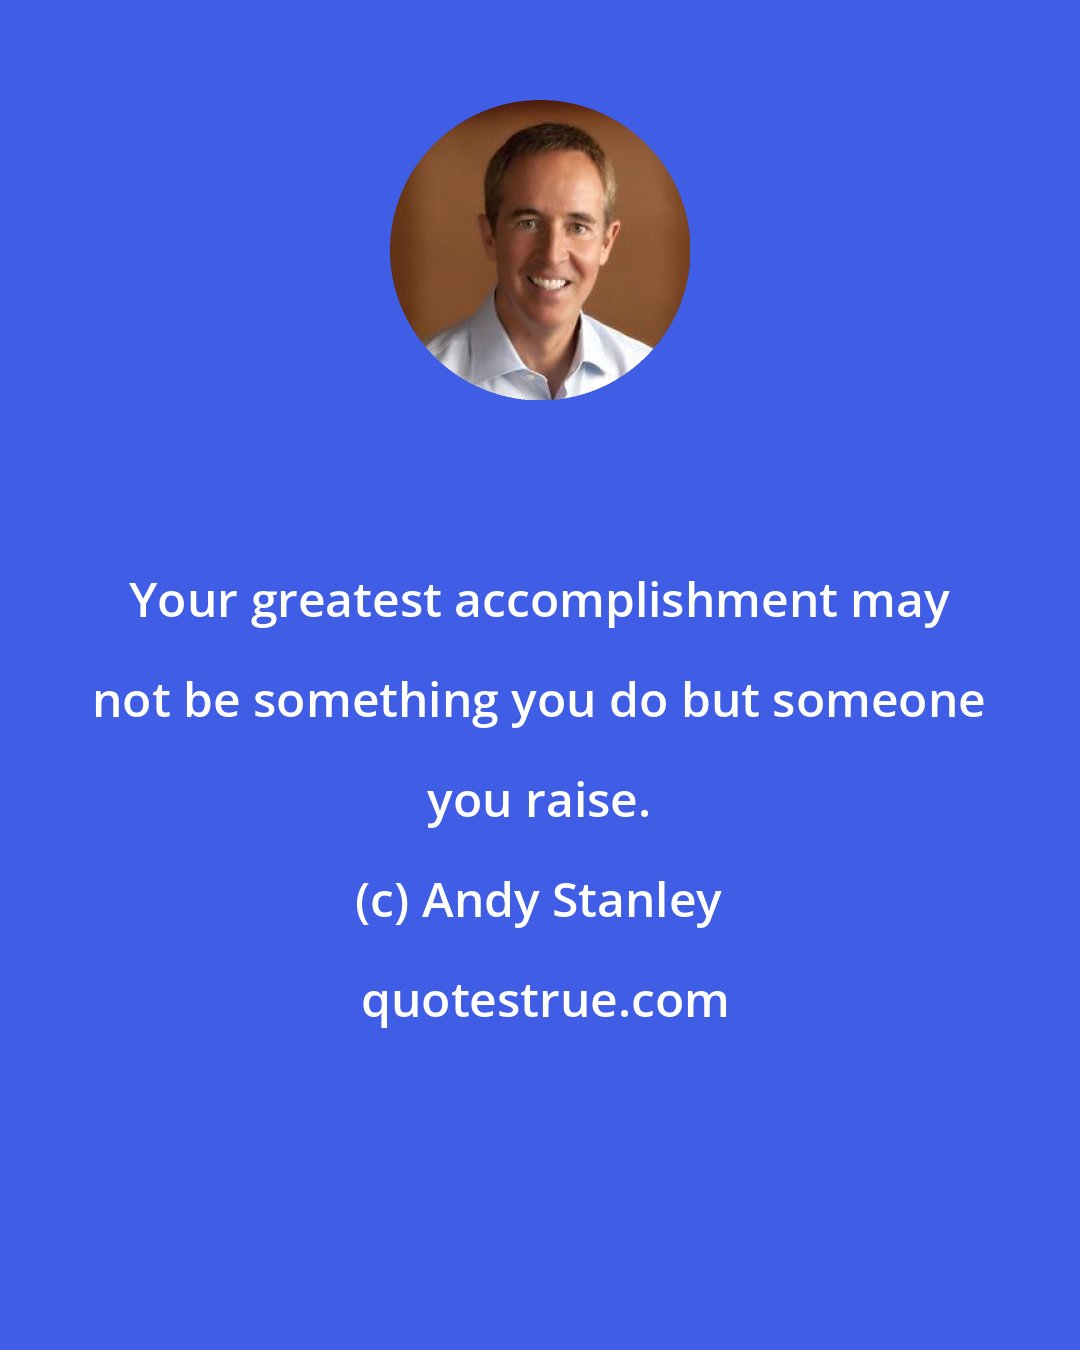 Andy Stanley: Your greatest accomplishment may not be something you do but someone you raise.